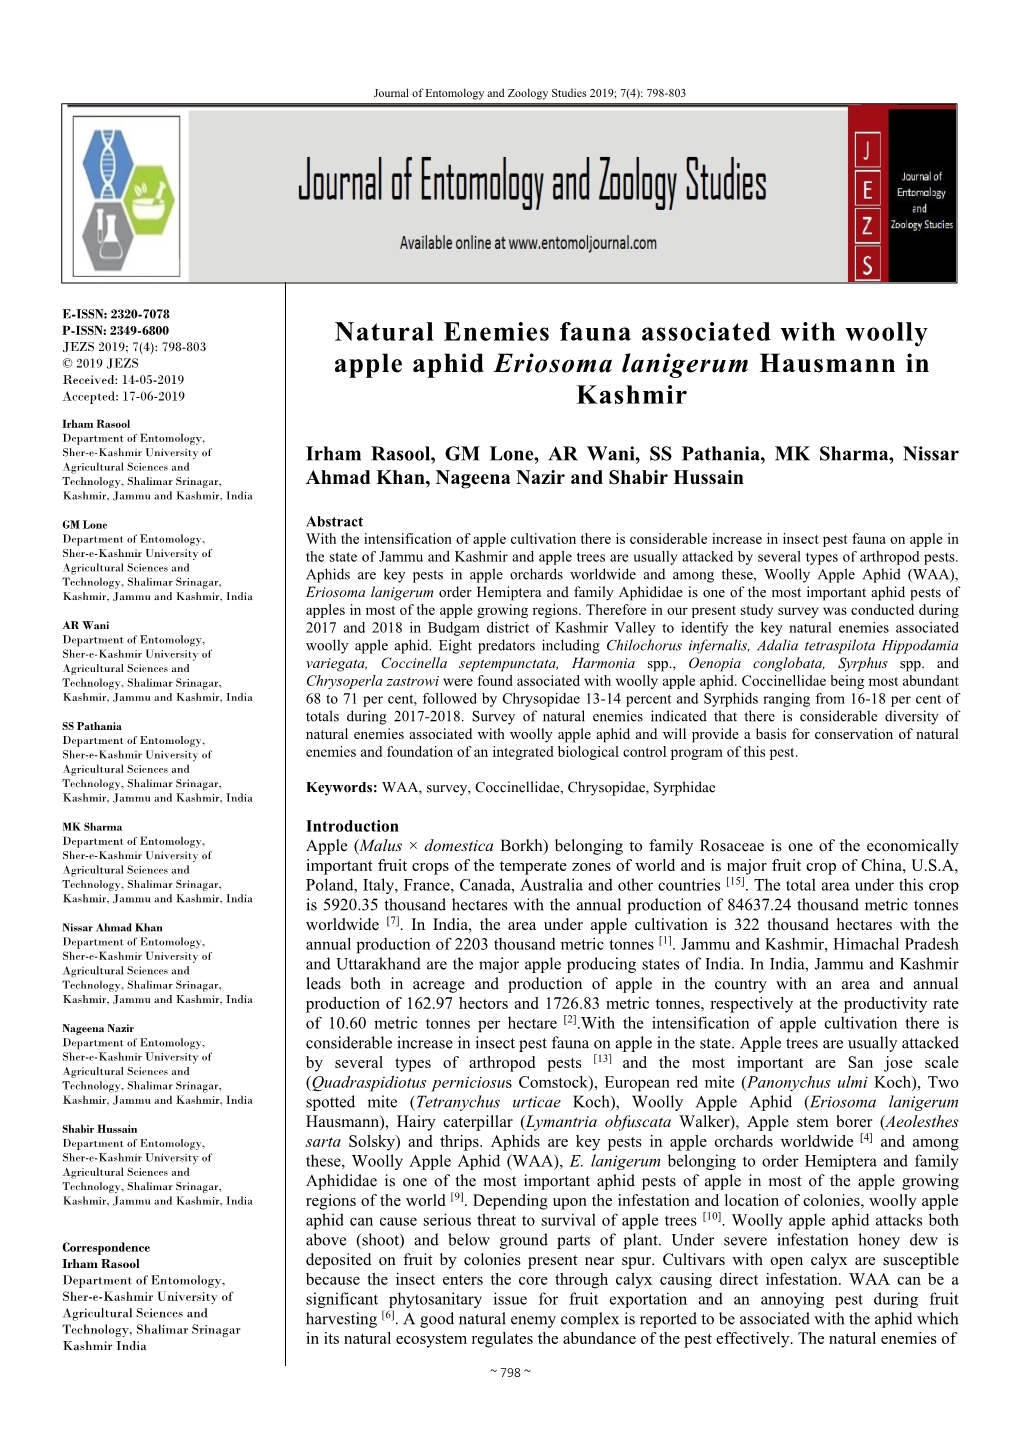 Natural Enemies Fauna Associated with Woolly Apple Aphid Eriosoma